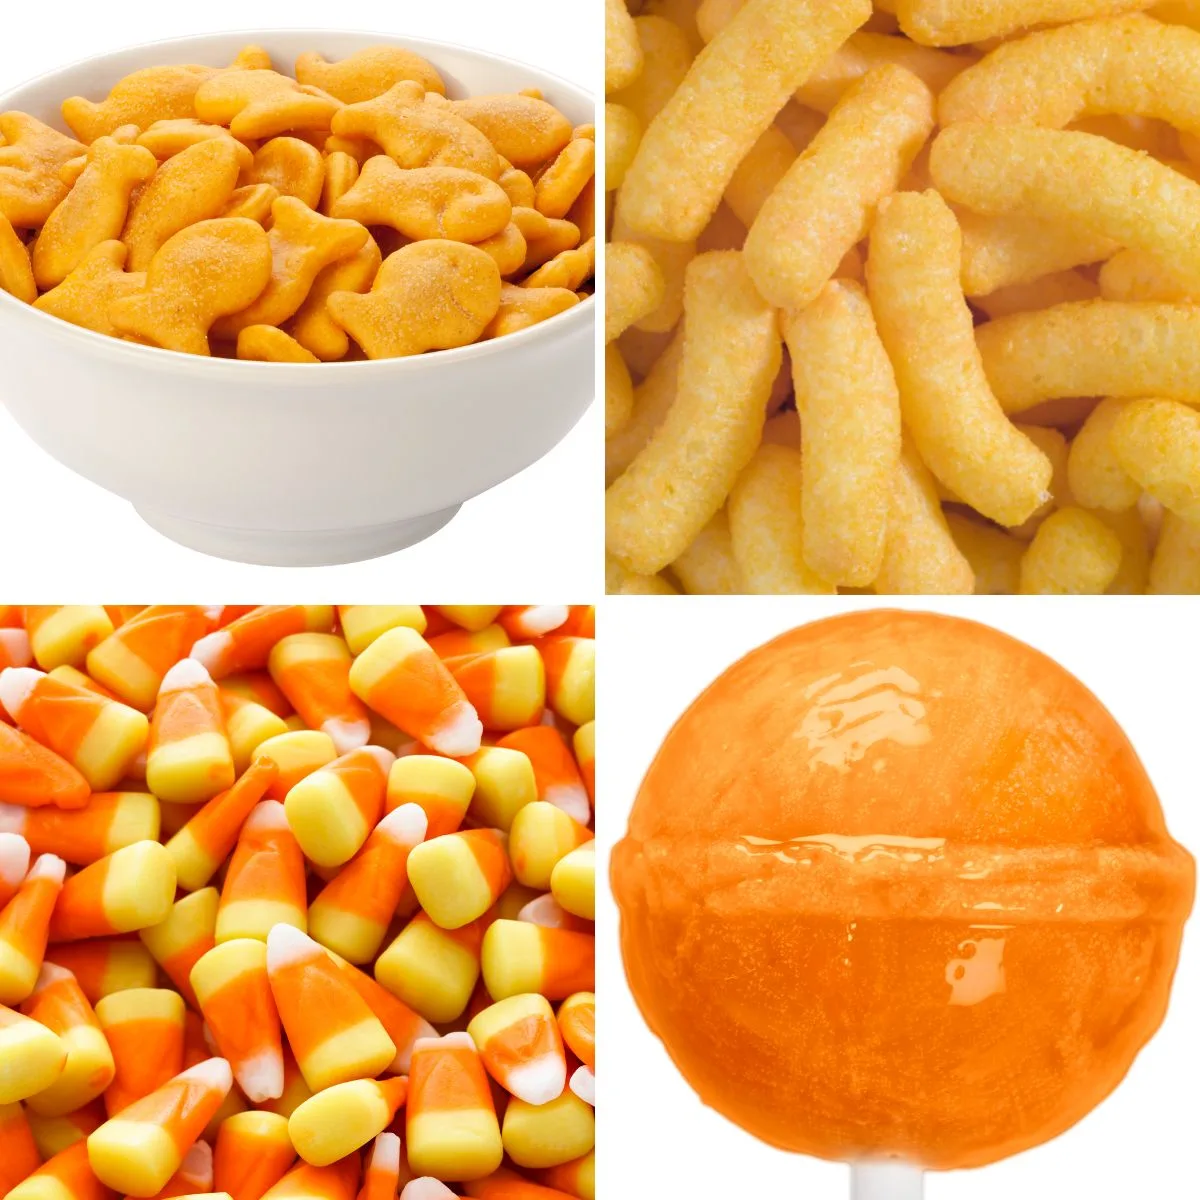 Collage of 4 orange drinks and sweets